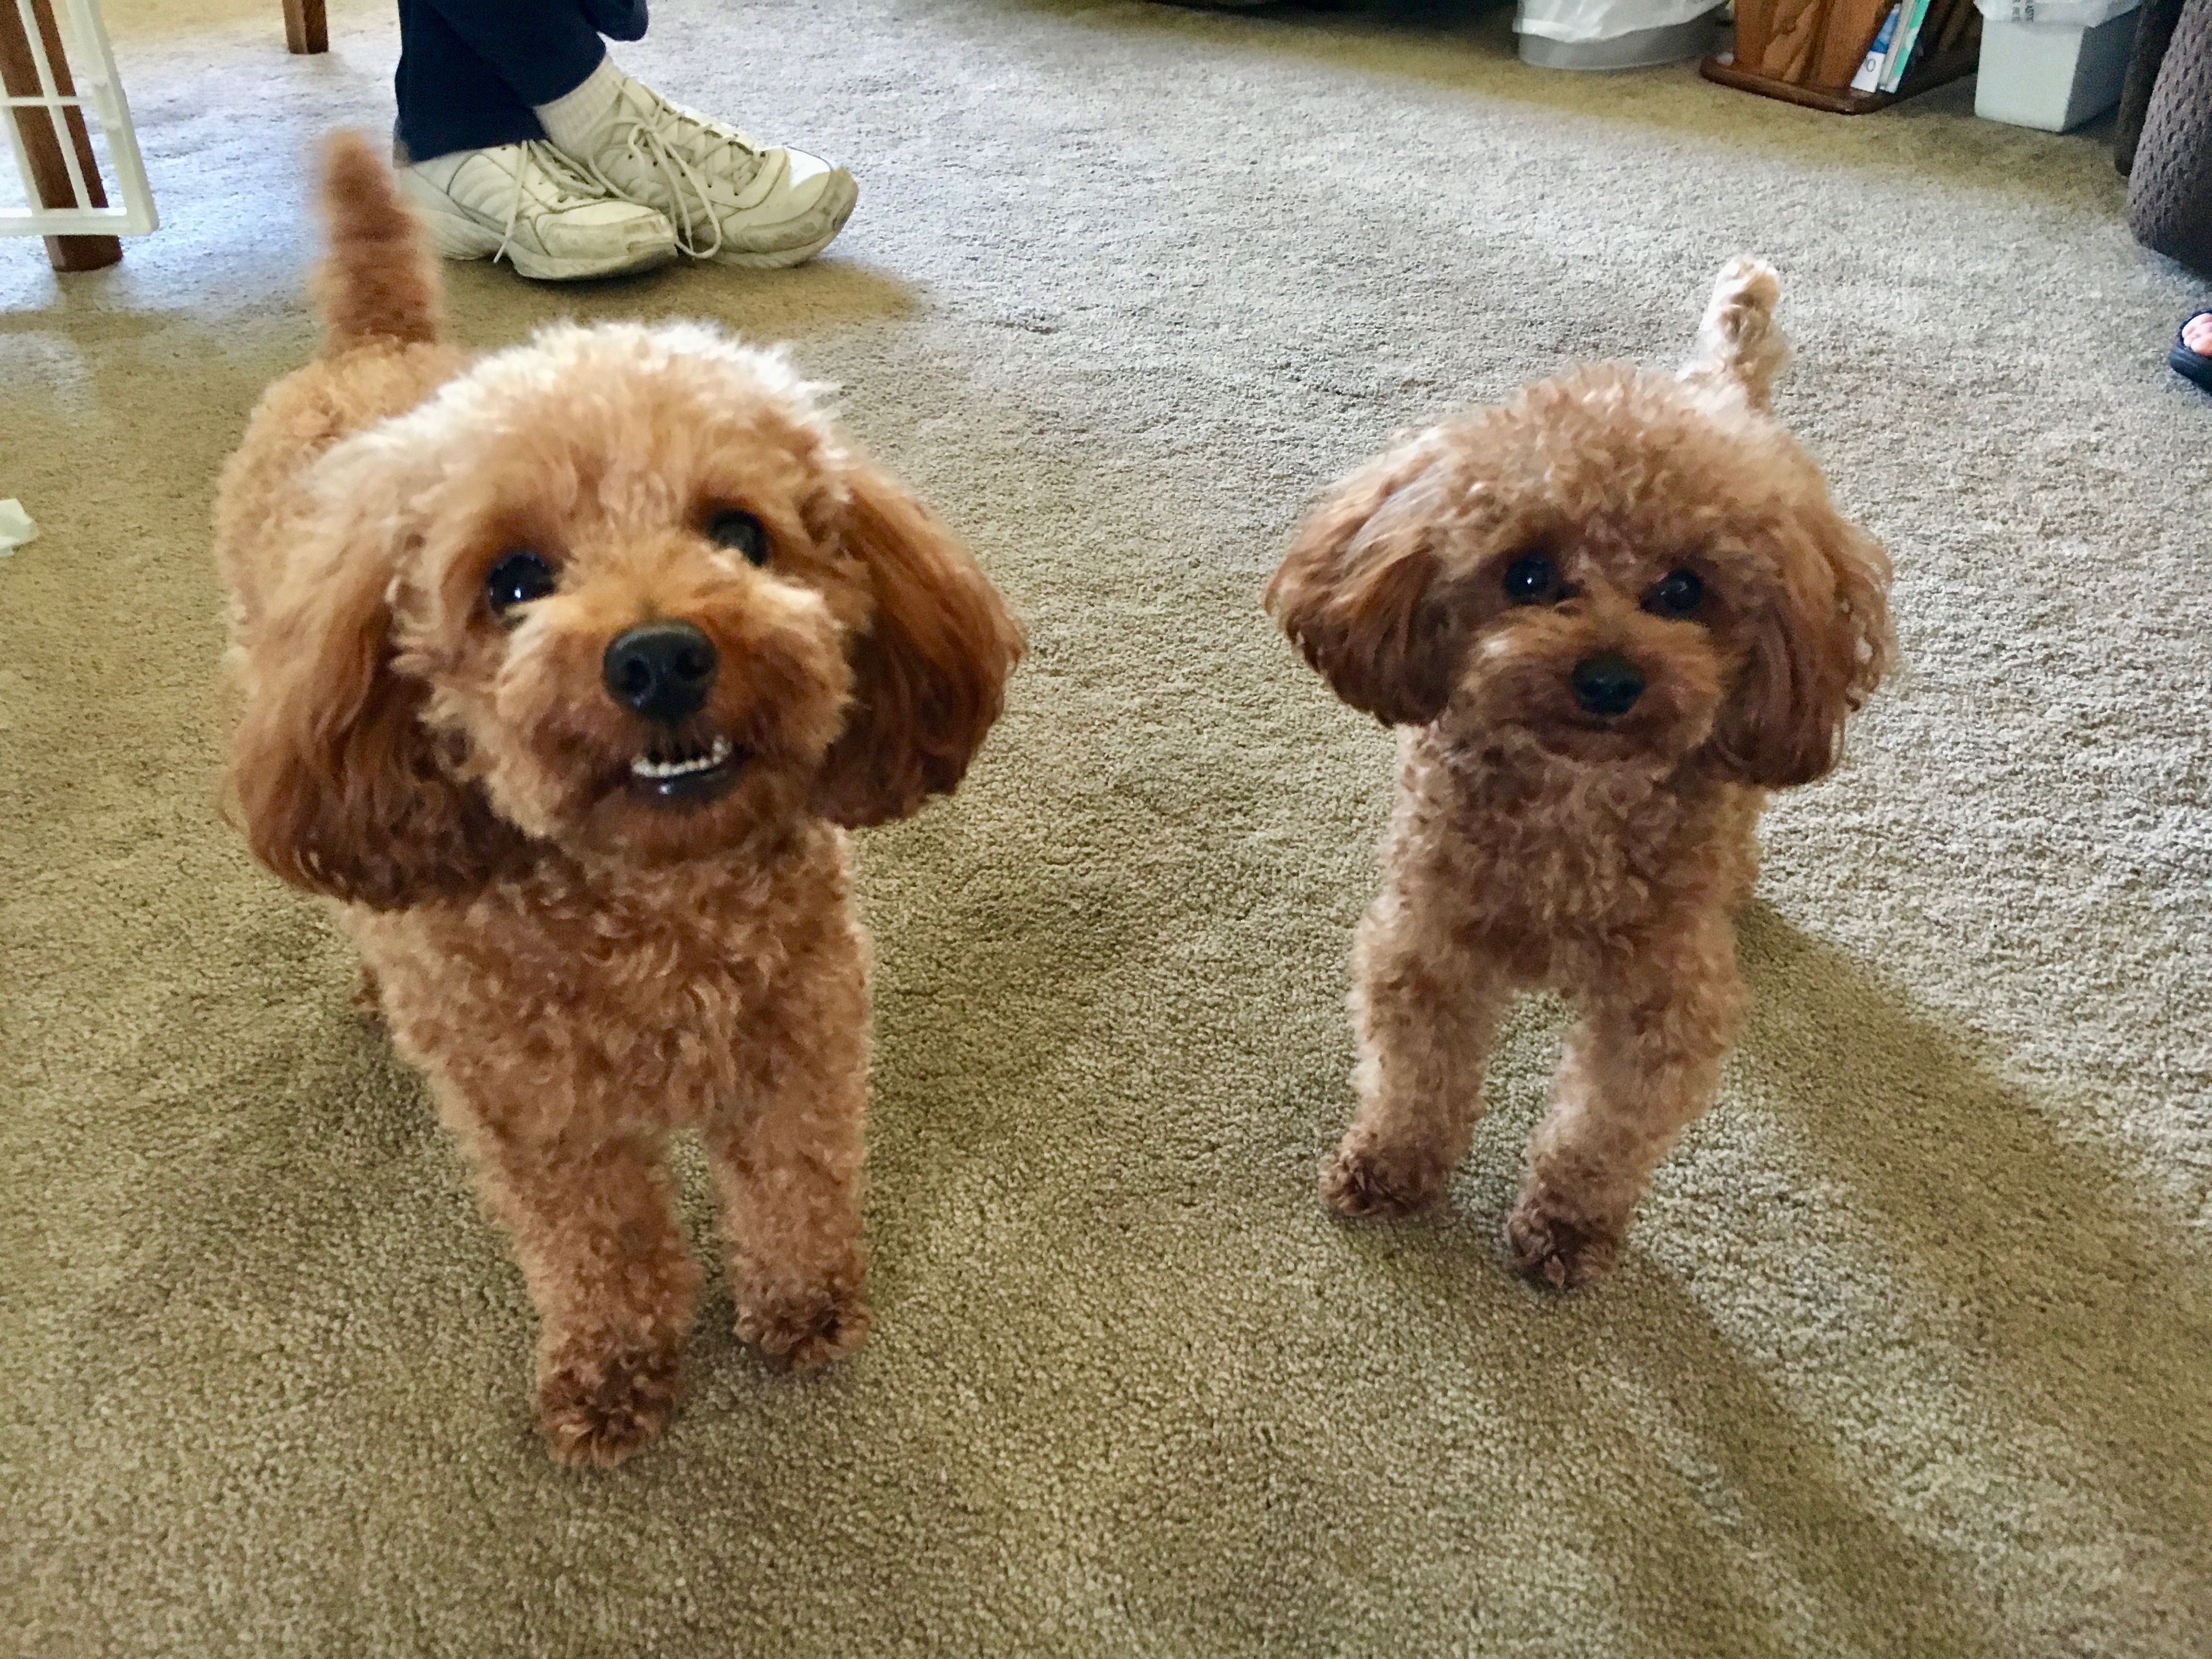 Teaching a Pair of Red Toy Poodles Basic Commands to Boost their  Confidence: Dog Gone Problems